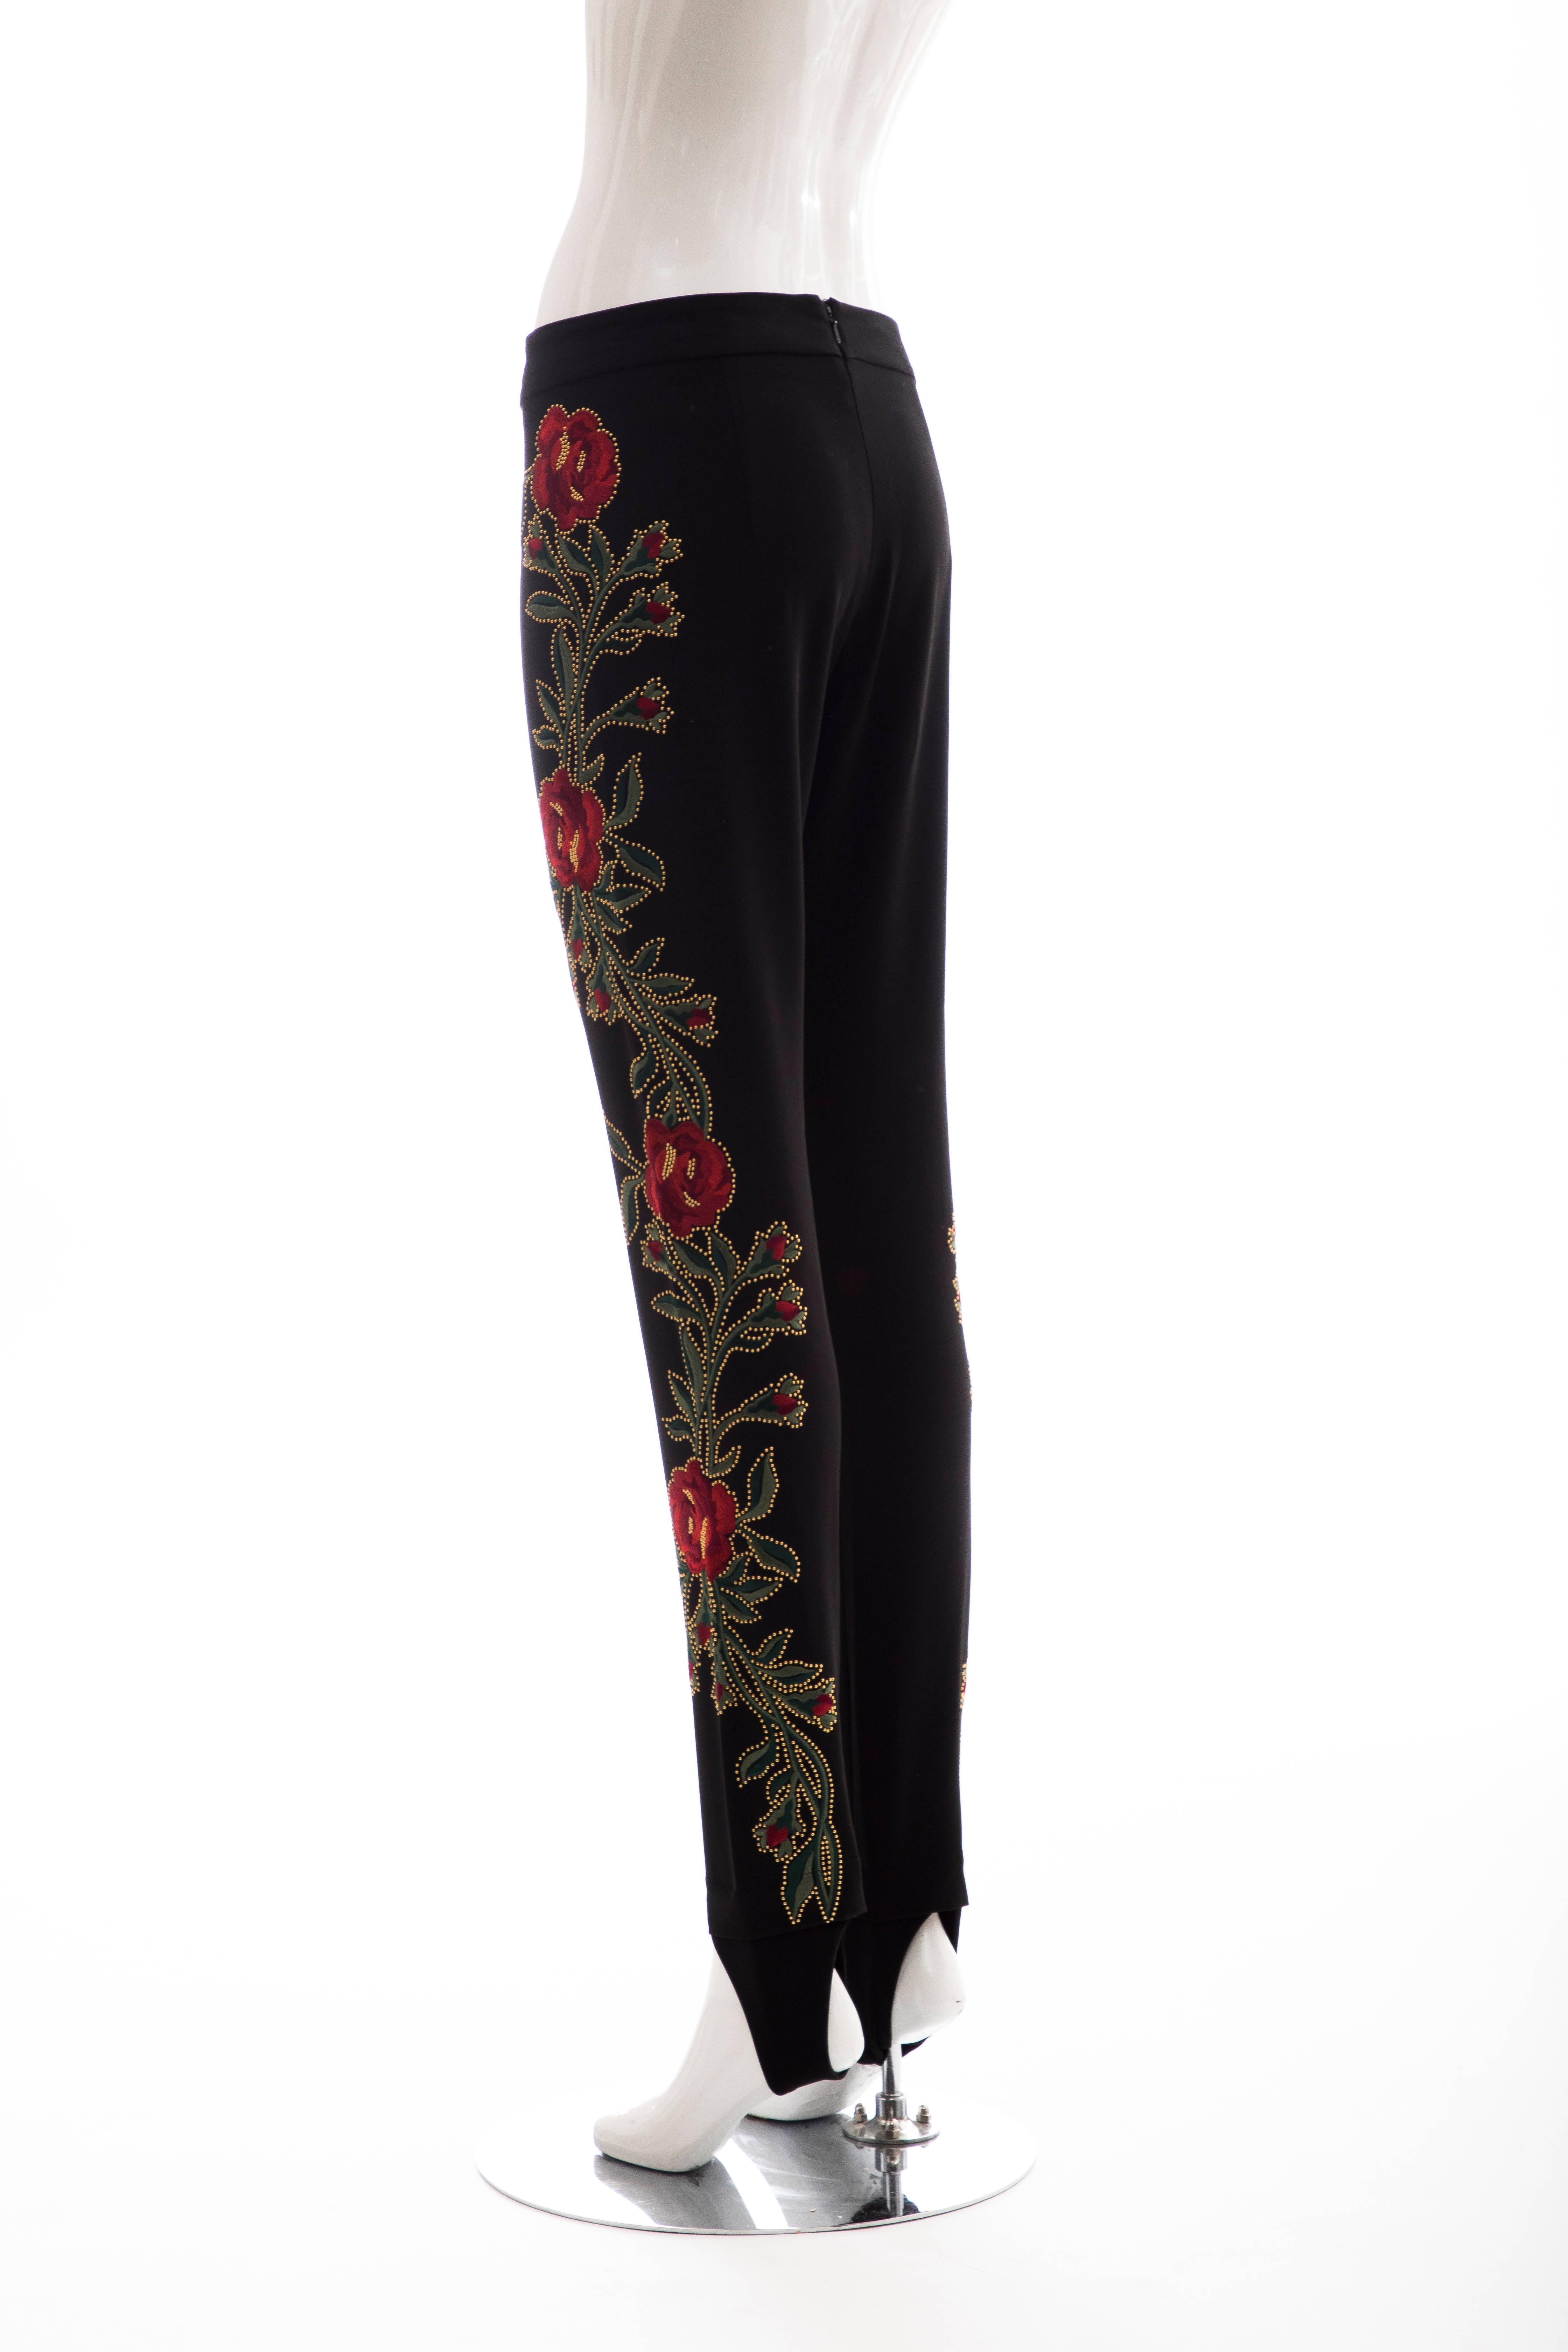 Moschino Runway Black Floral Embroidered & Gold Studded Pants, Fall 2013 For Sale 1